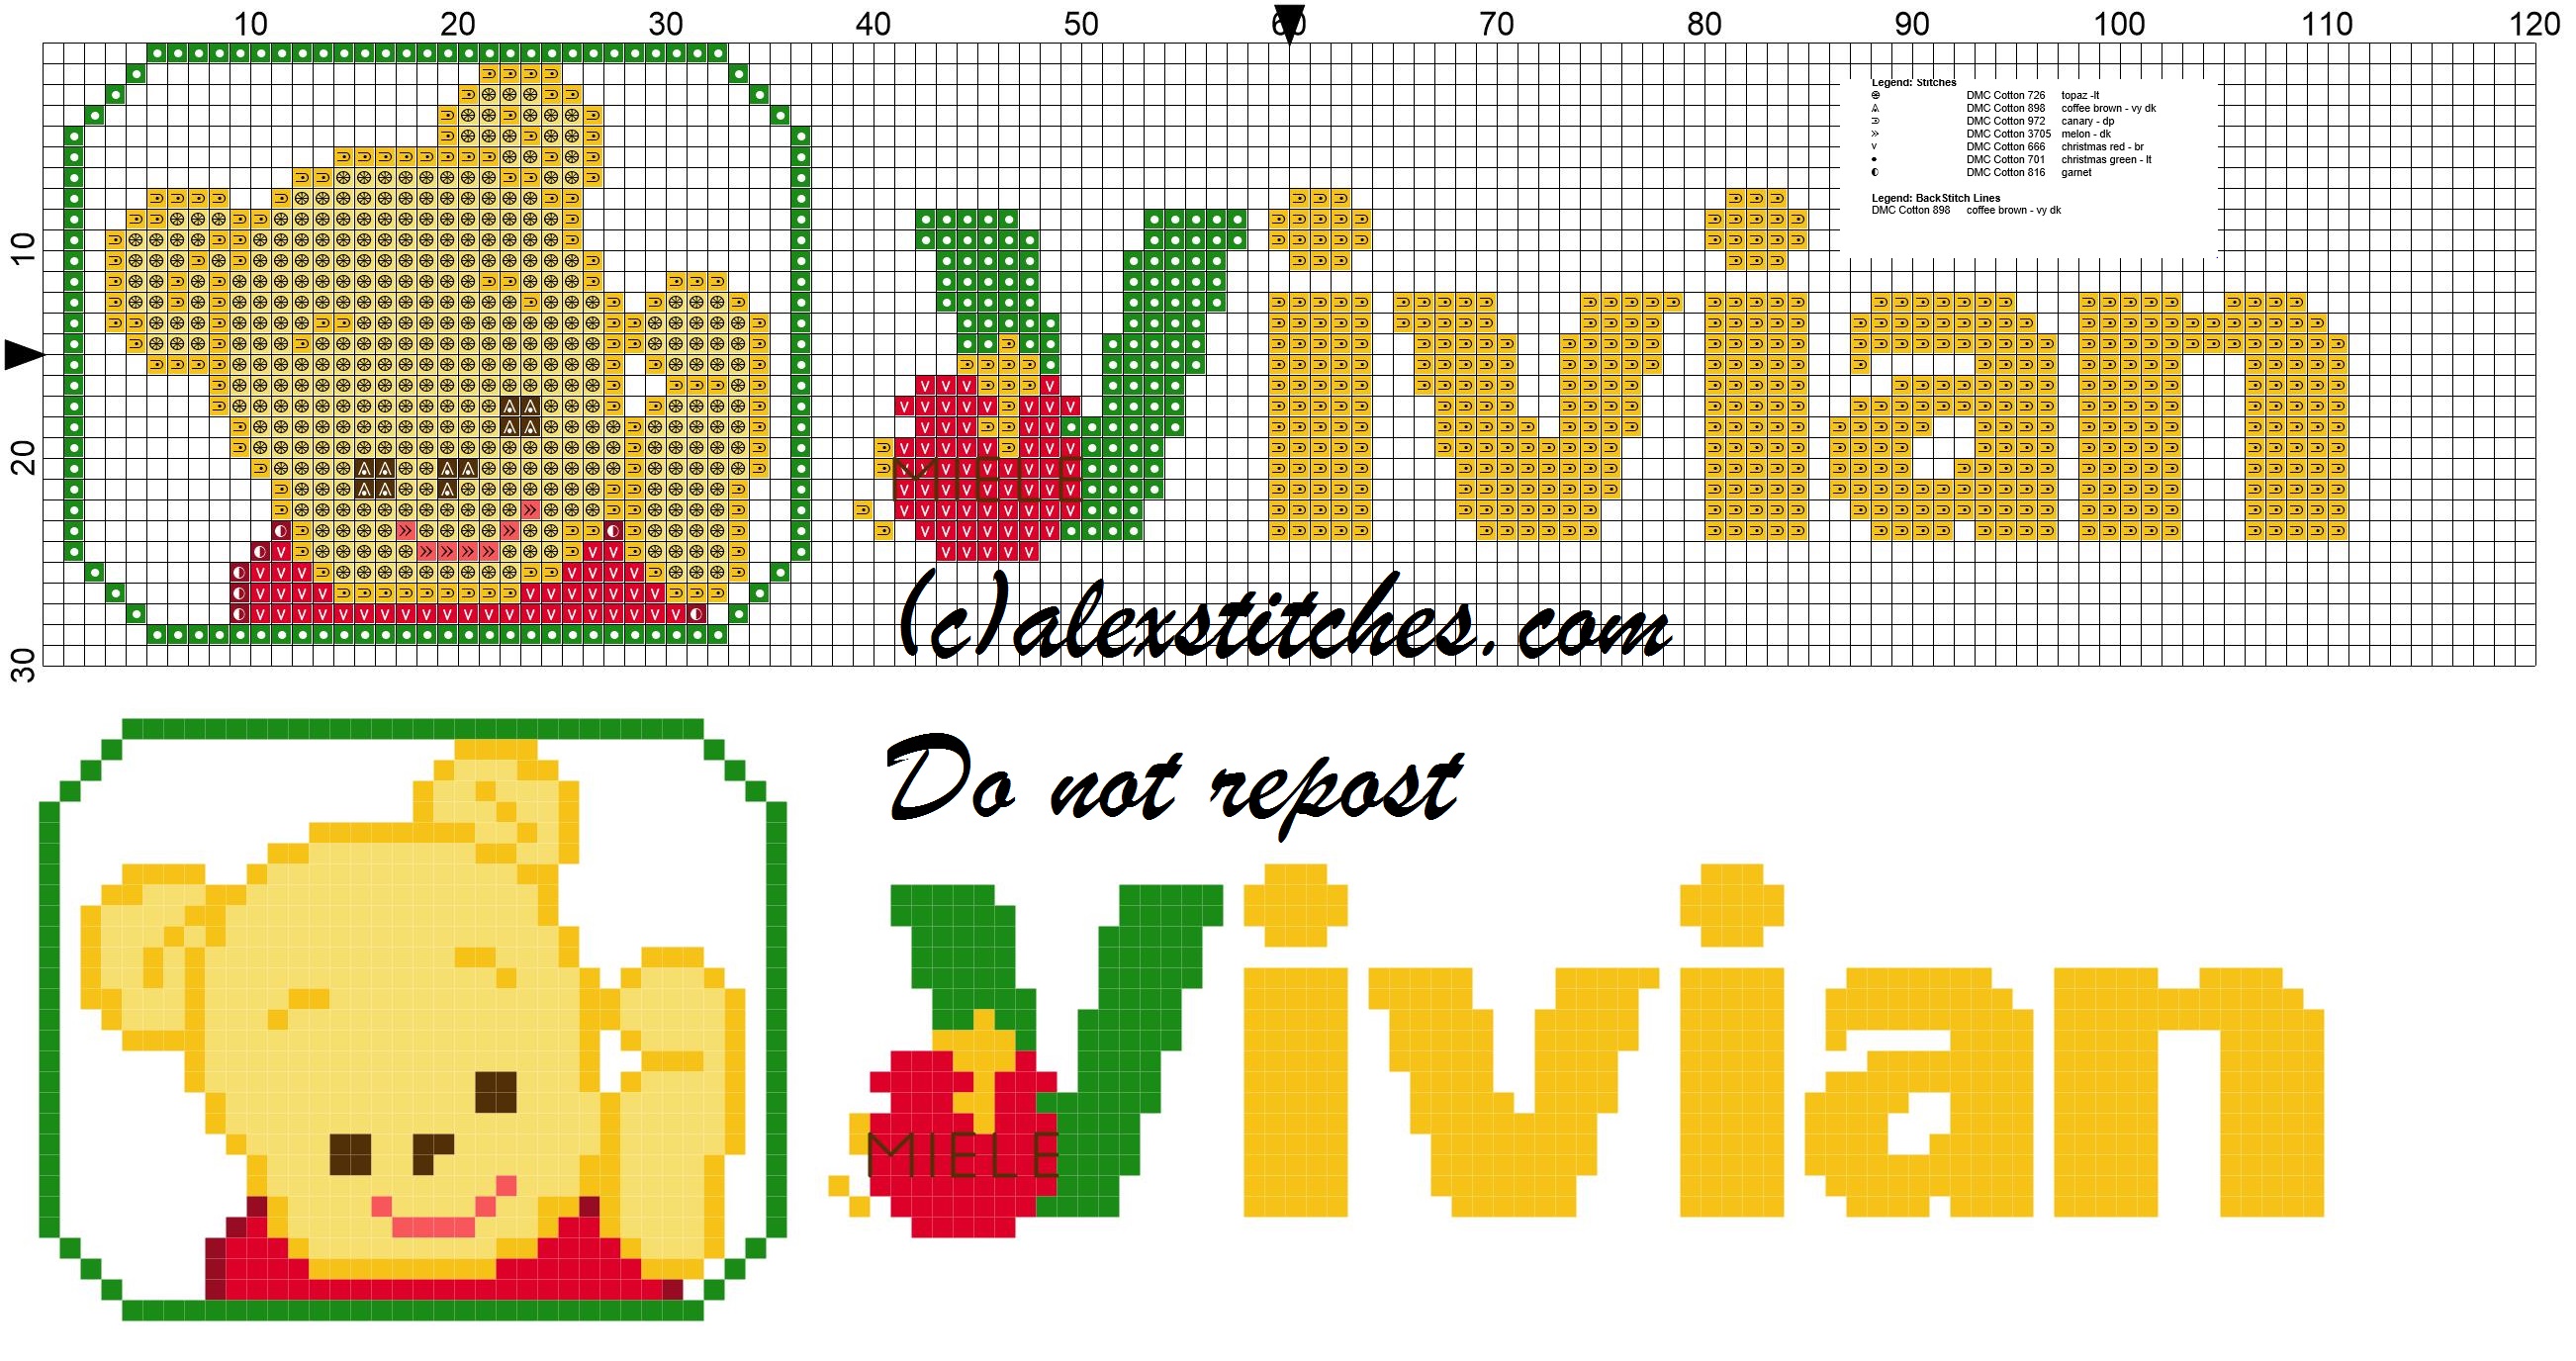 Vivian name with Baby winnie the pooh free cross stitches pattern